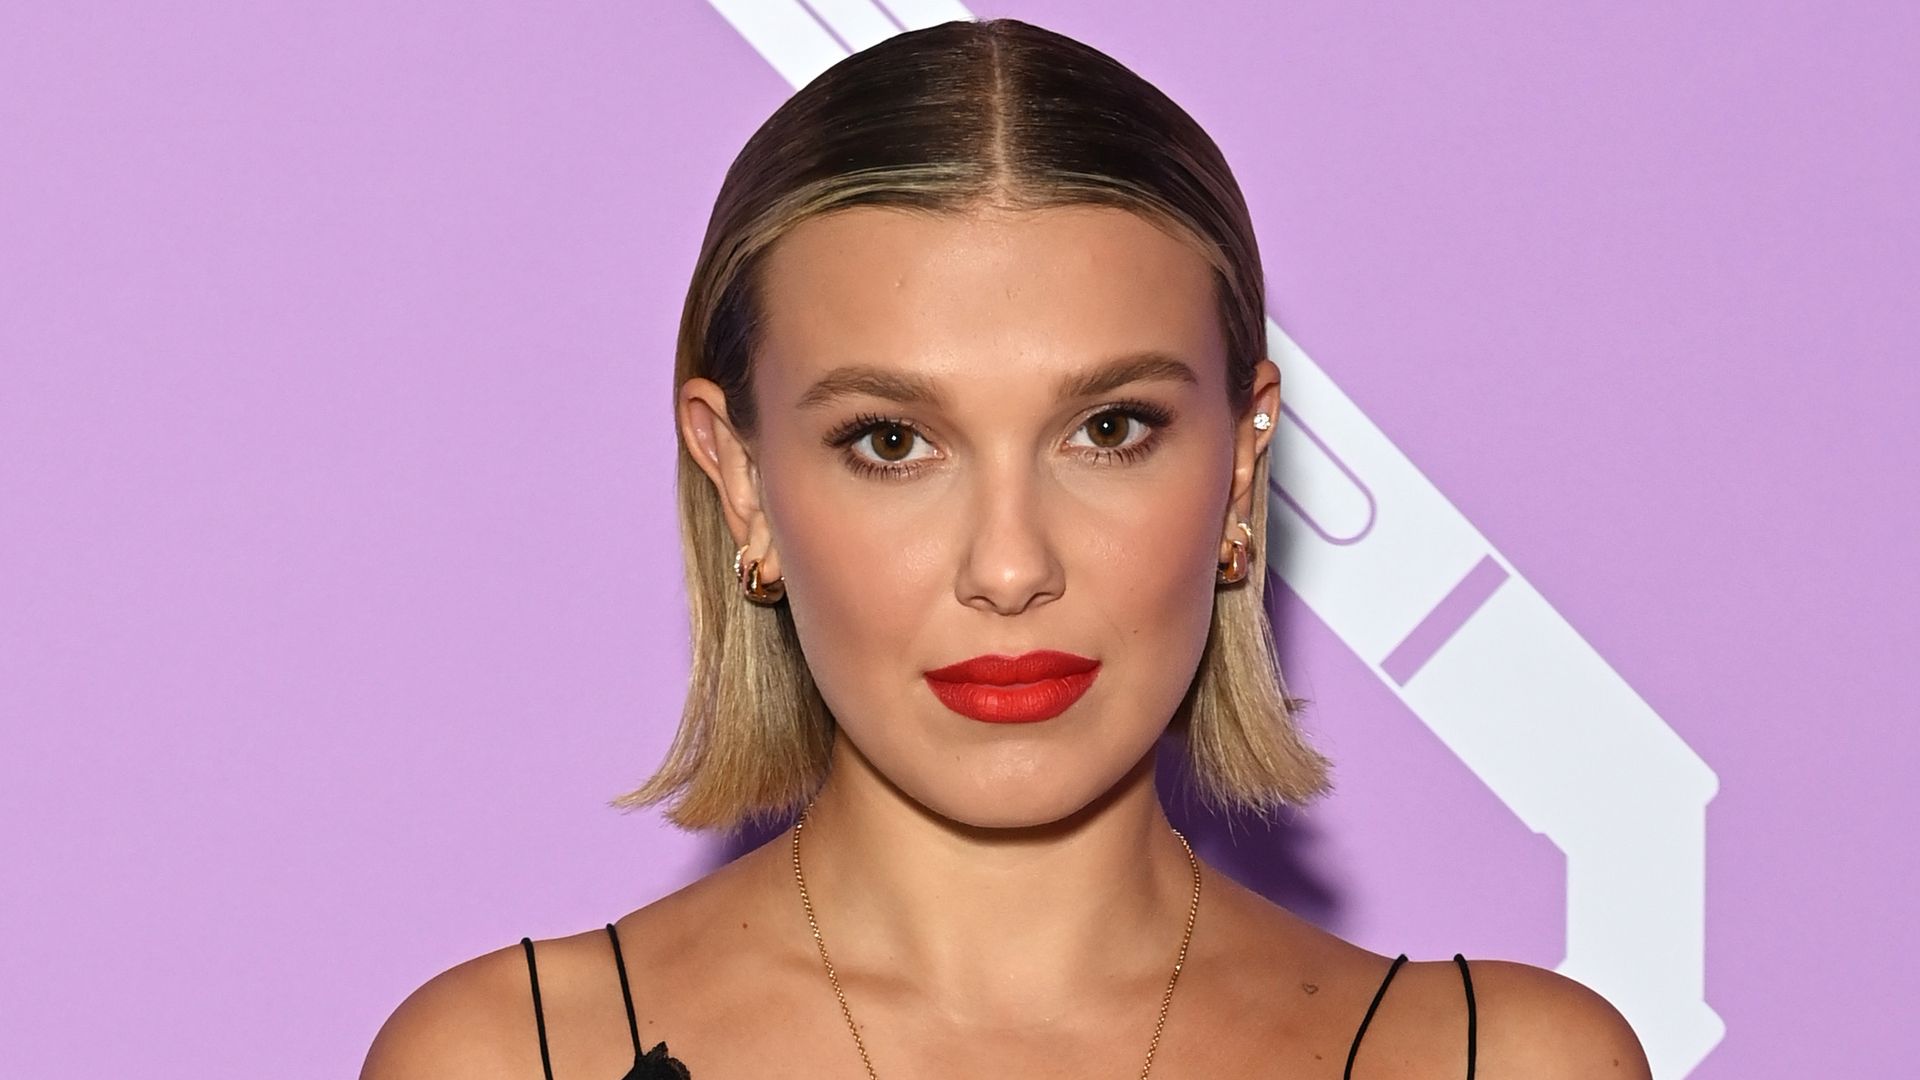 NEW YORK, NEW YORK - AUGUST 10: Millie Bobby Brown attends the Samsung 2022 Galaxy Creators Lounge Event on August 10, 2022 in New York City. (Photo by Bryan Bedder/Getty Images for Samsung)